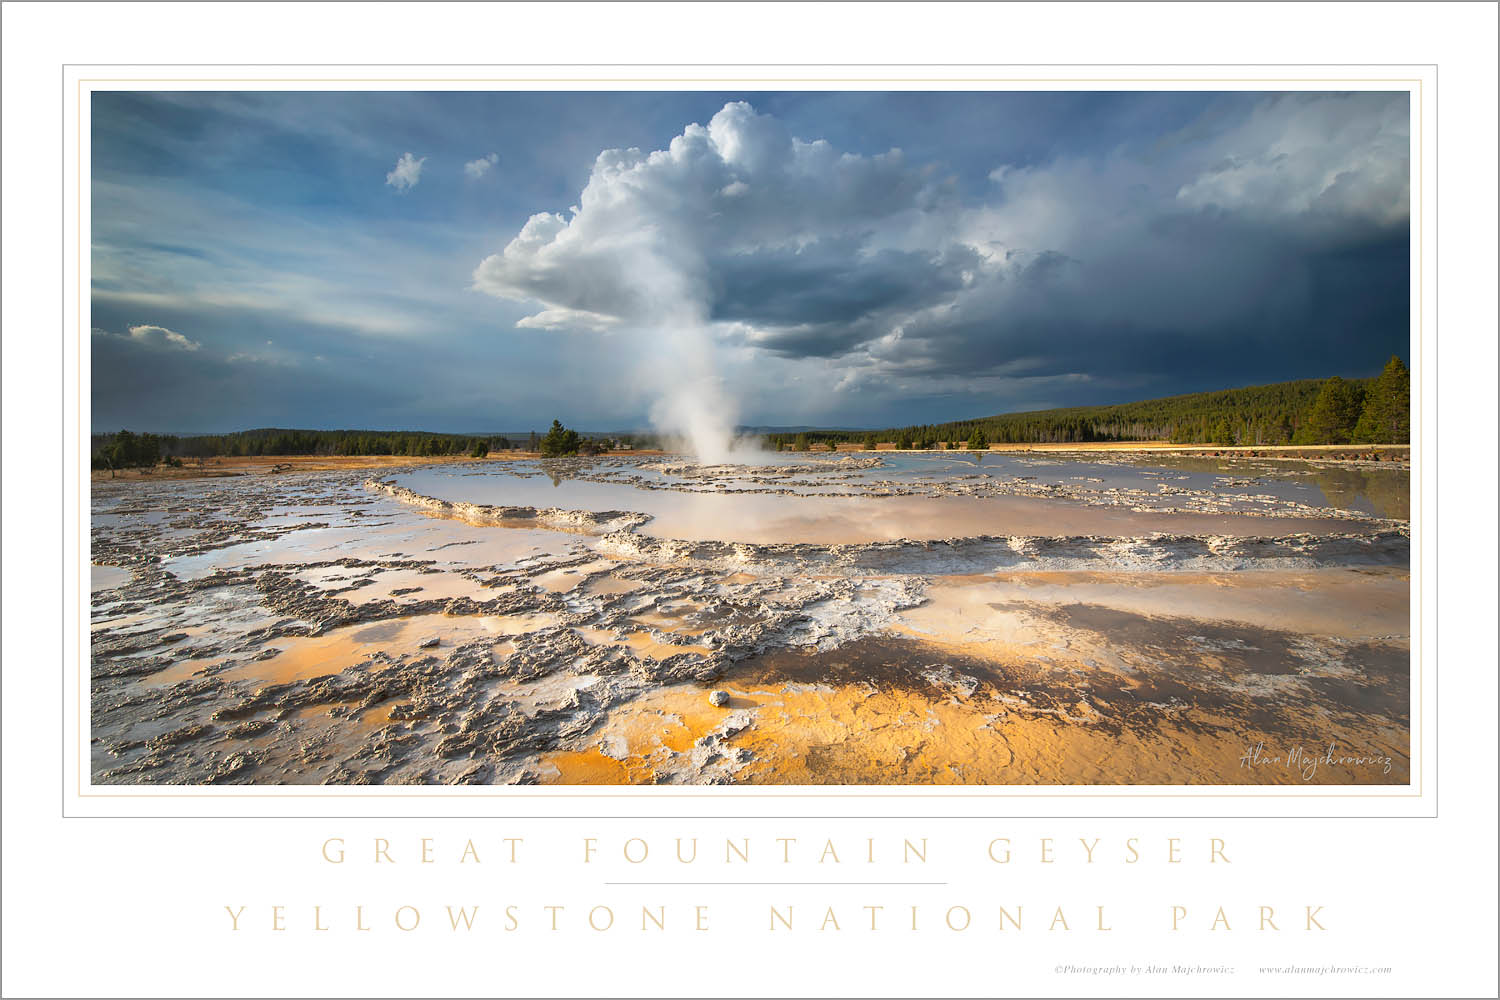 Colorful travertine formations at Great Fountain Geyser Yellowstone National Park